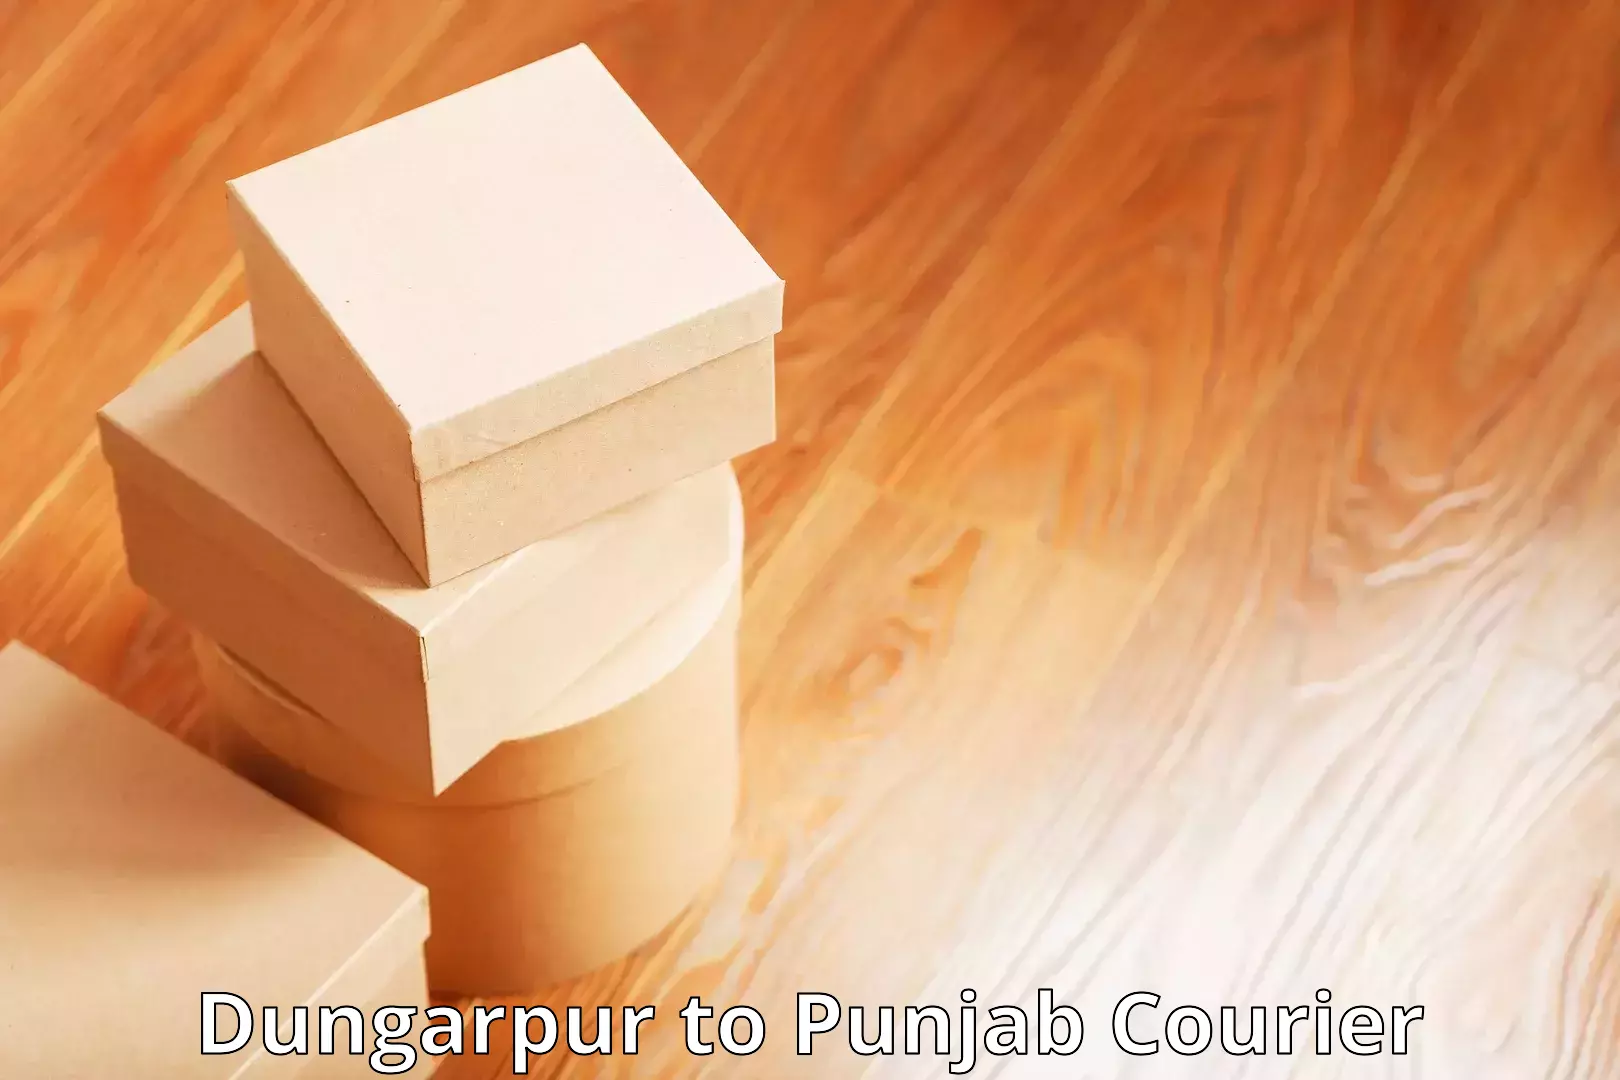 Customer-oriented courier services Dungarpur to Punjab